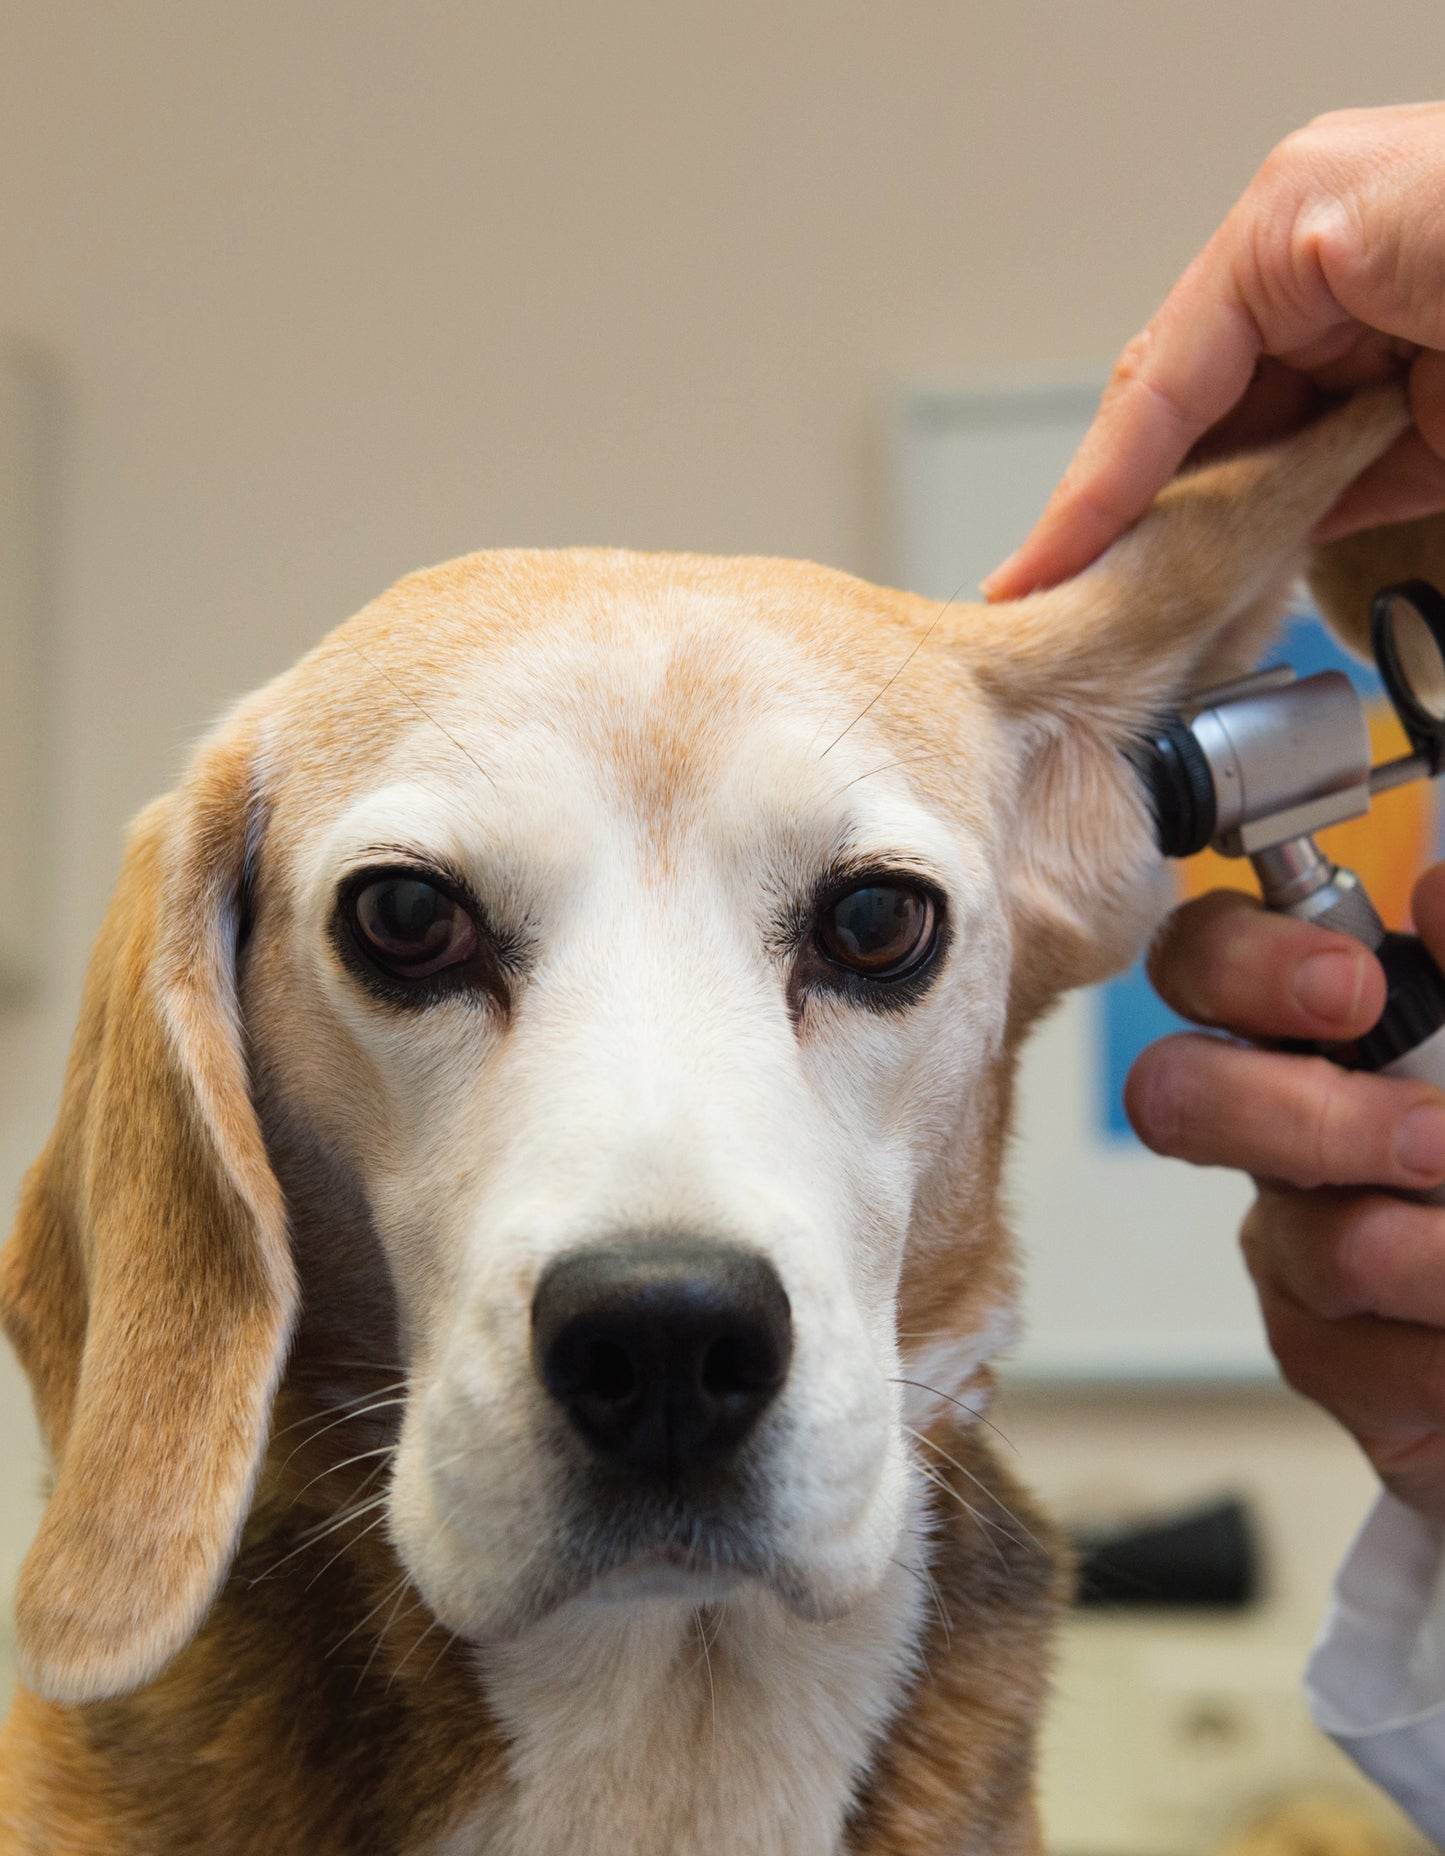 Ultimate Guide to Dog Care